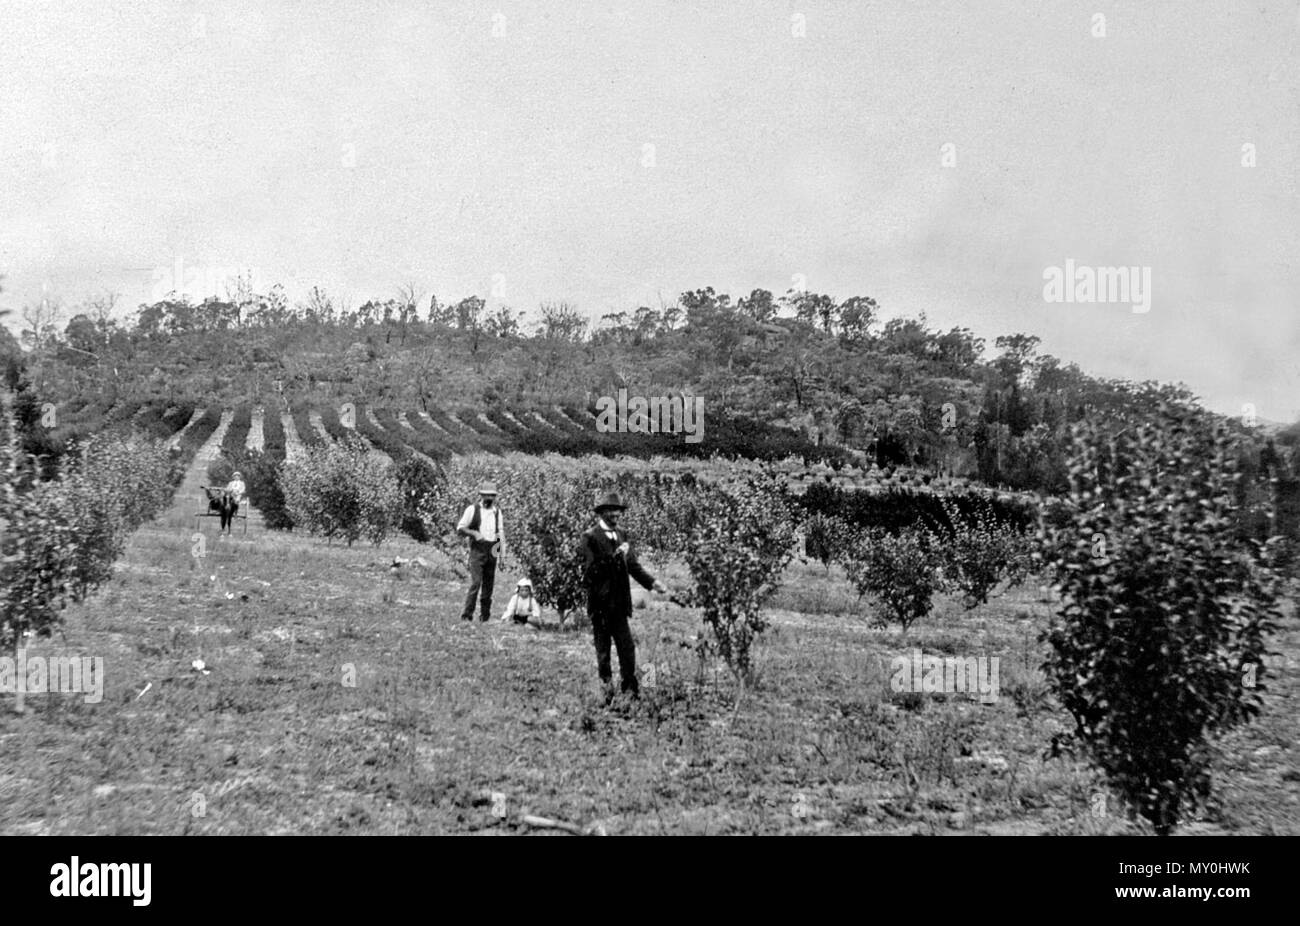 Fruit Orchard, Ballandean c1890. Toowoomba Chronicle and Darling Downs General Advertiser 7 February 1895  The Governor at Stanthorpe 218300946 )   The Governor, Sir Henry Norman, arrived here by tho mail train on Saturday morning, and afterwards started out to see Fletcher's orchard at Ballandean. His Excellence was driven by Mr. W. H. M. Quaker, chairman of the Divisional Board, and was accompanied by about a dozen townsmen in buggies. The party had luncheon at Ballandean, and afterwards inspected the orchard, which consists of thirty-three acres planted with fruit trees, which are looking e Stock Photo